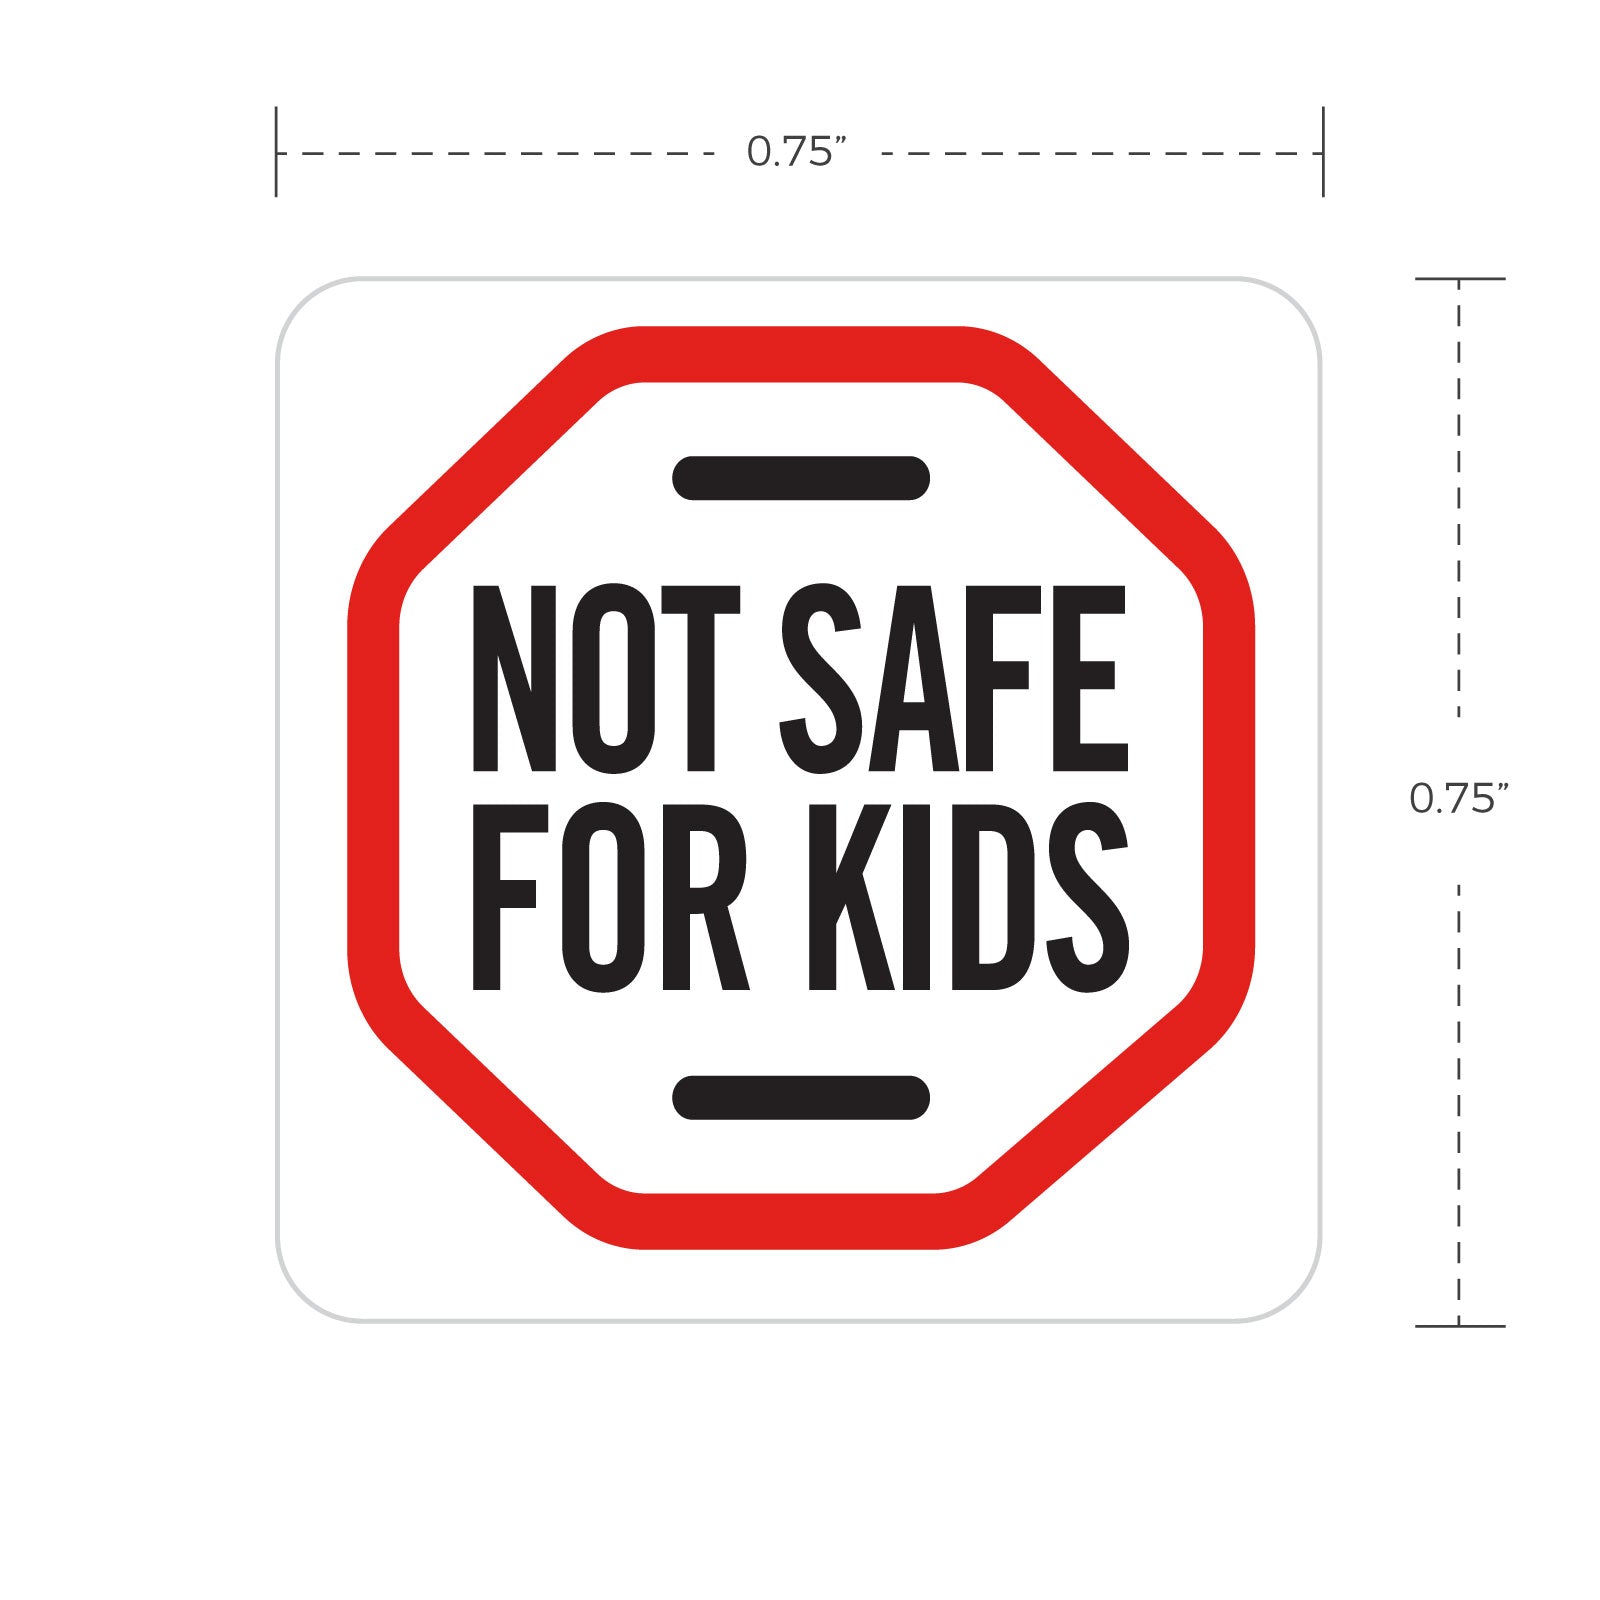 Massachusetts/Maine State Child Safe Universal Symbol Labels 0.75"x0.75" -  1,000 Count